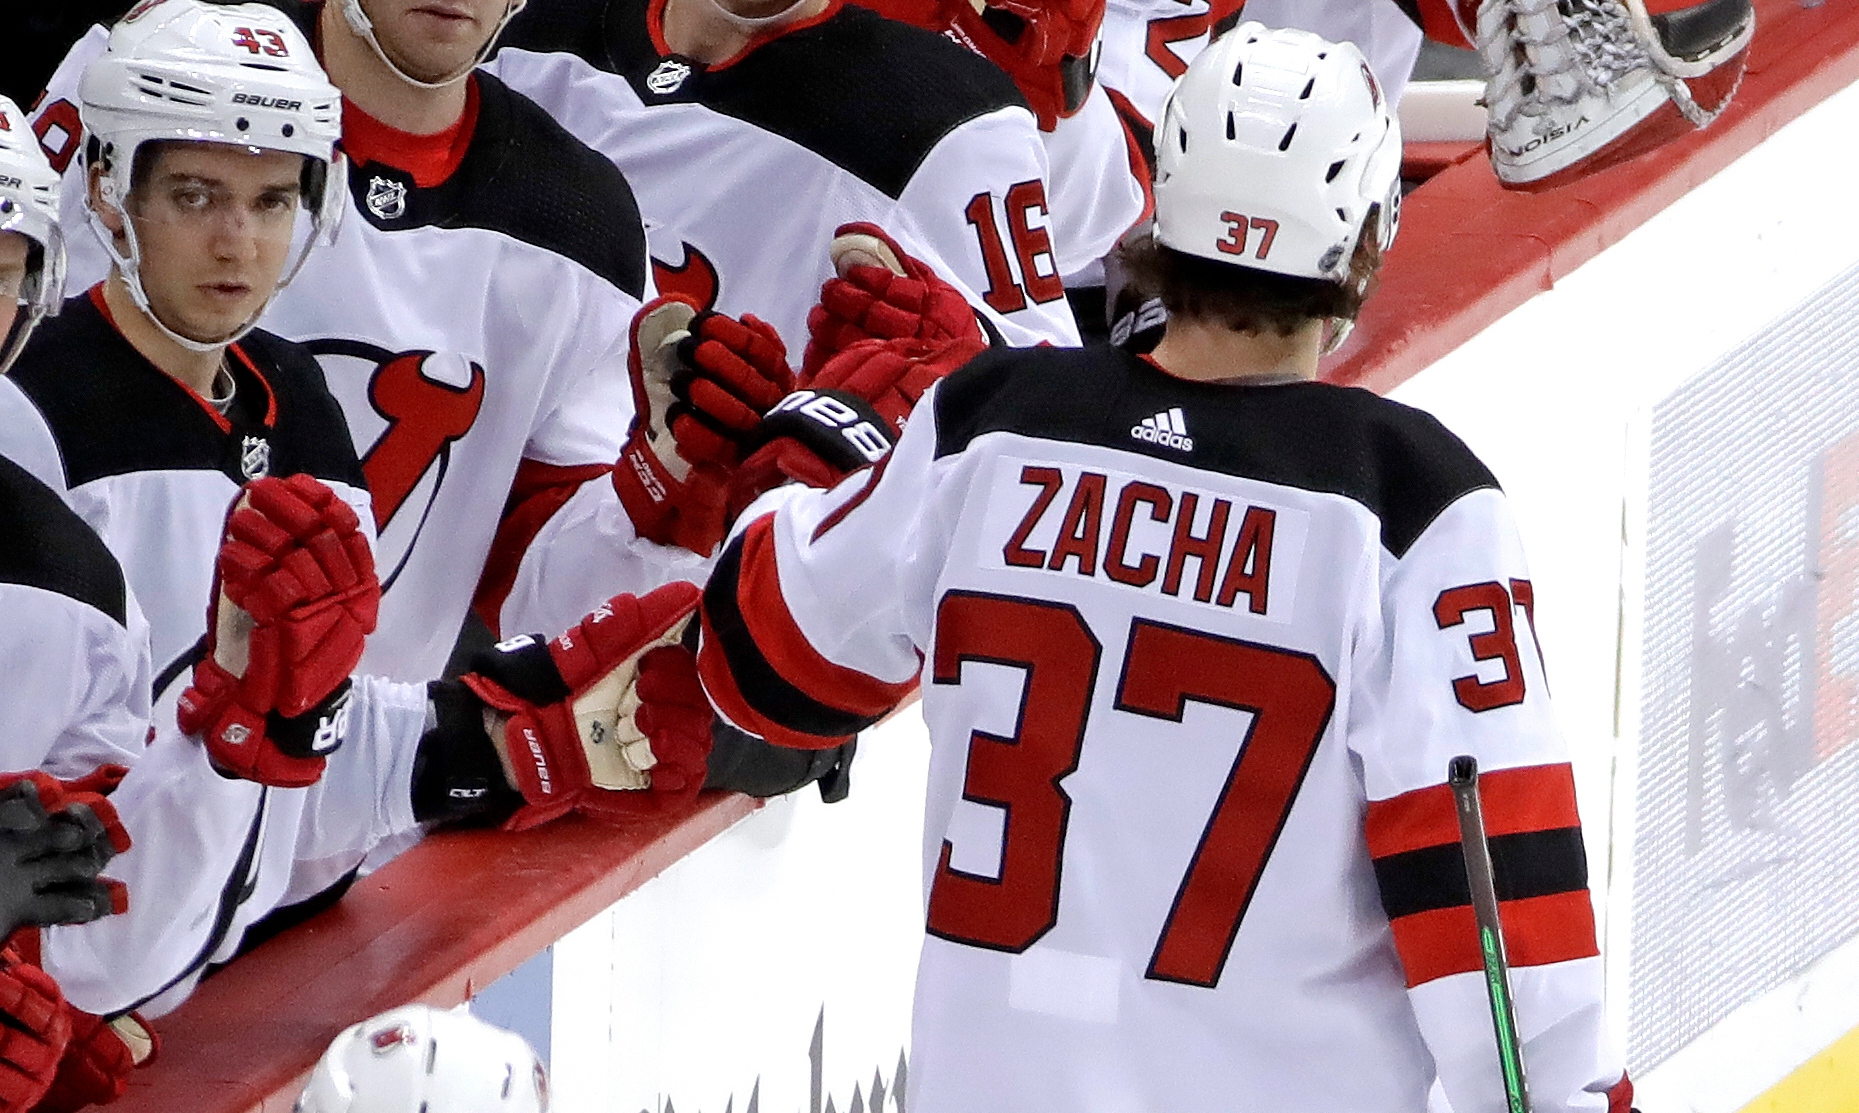 Inside The Rink - The Devils have inked Erik Haula to a three-year  extension! #NHL #NJDevils